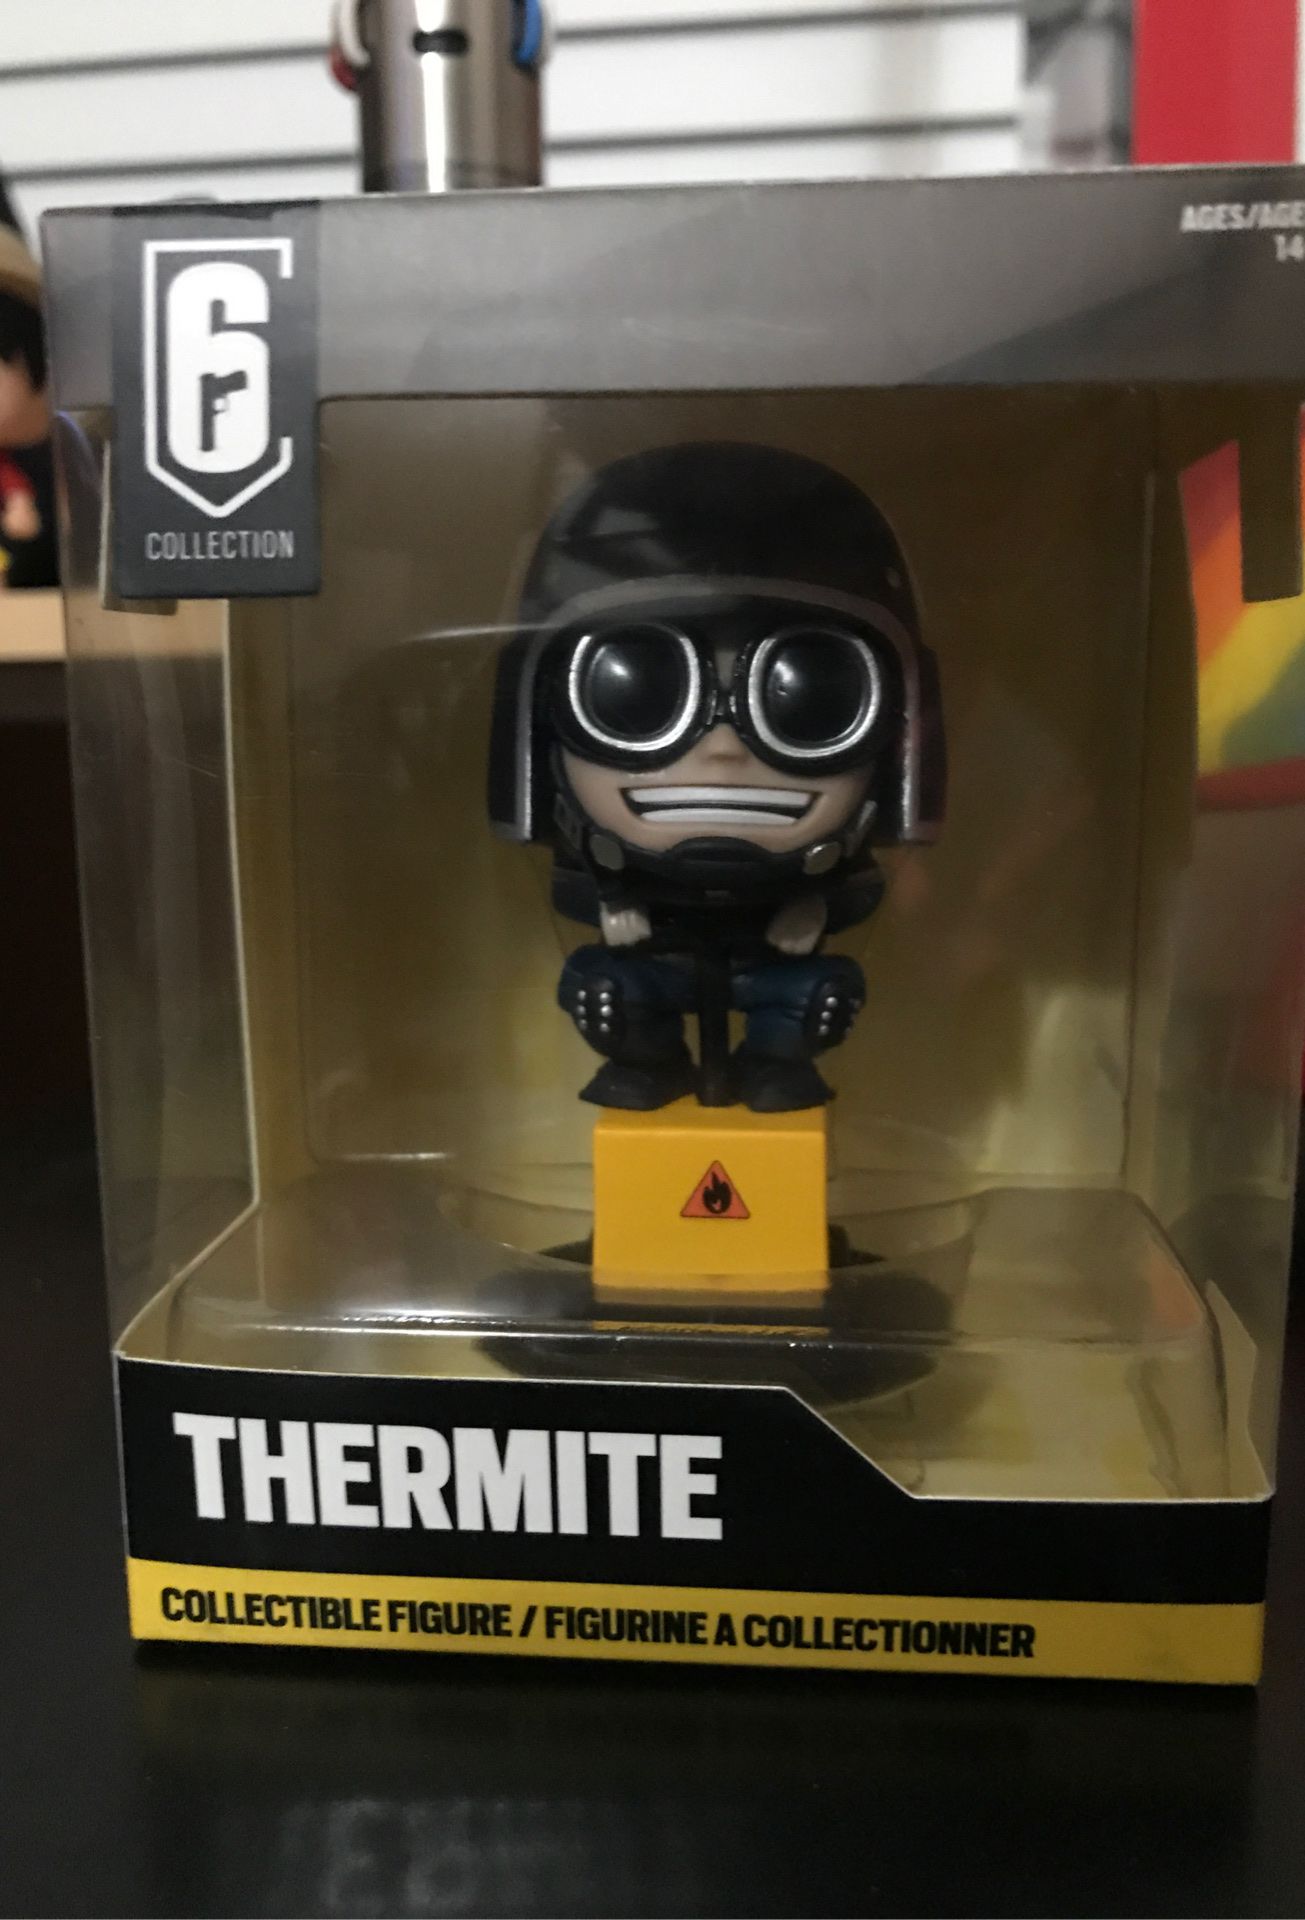 Rainbow six siege collectible figure (thermite)